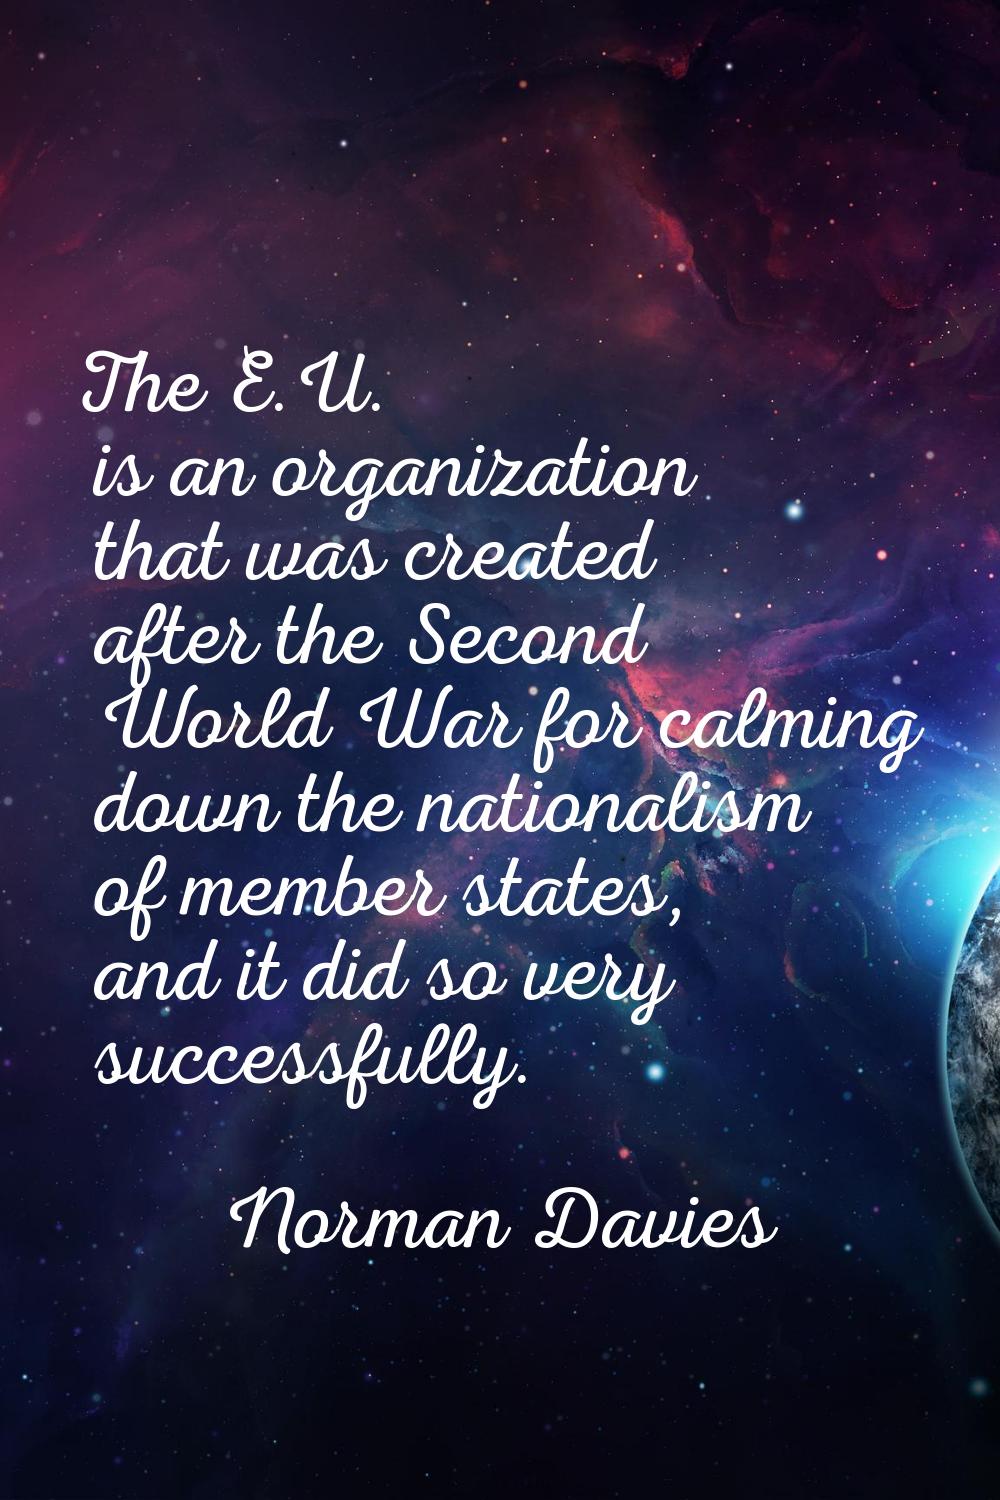 The E.U. is an organization that was created after the Second World War for calming down the nation